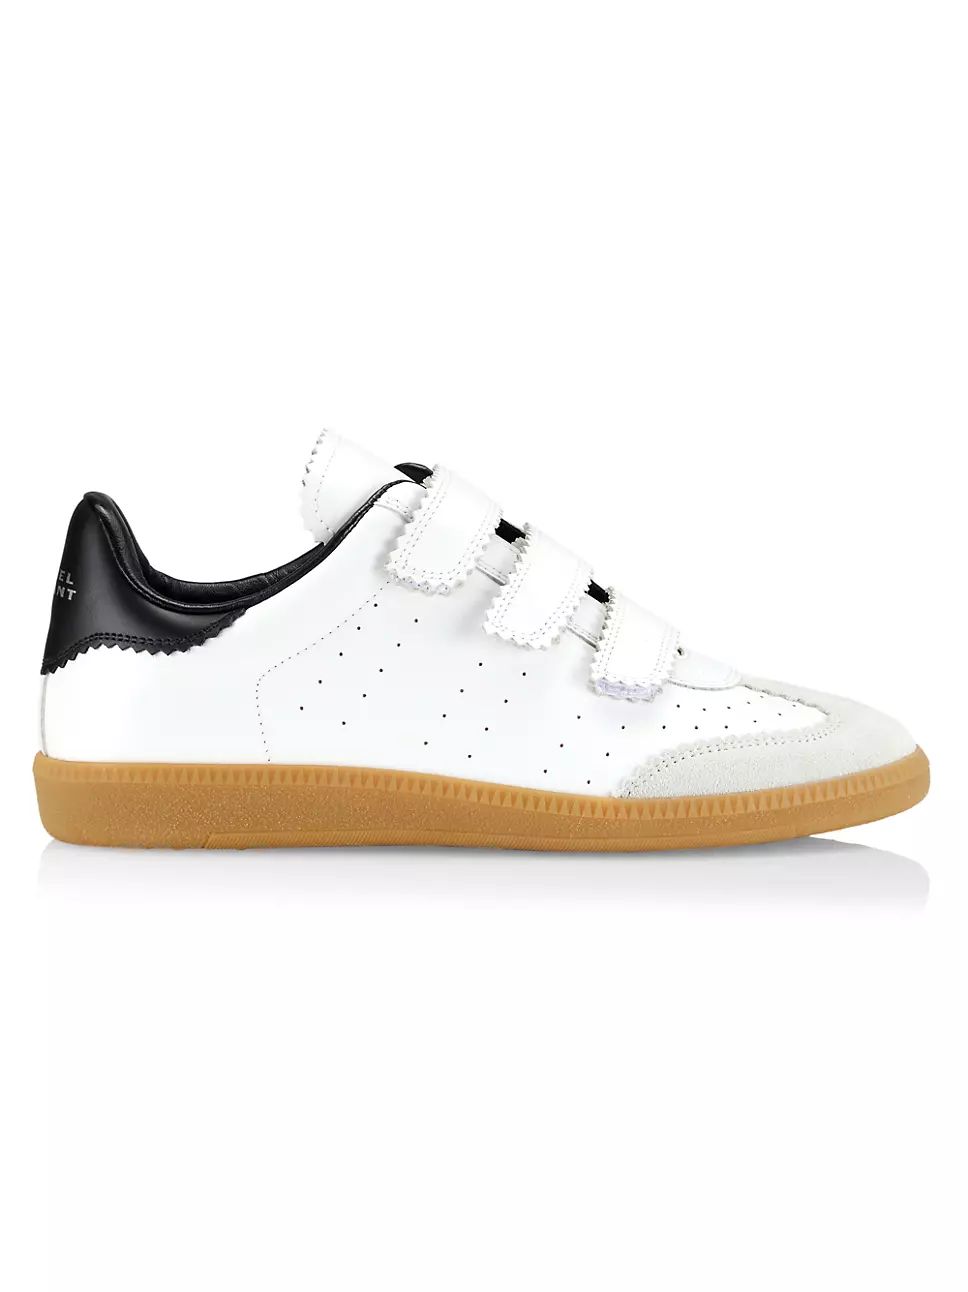 Beth Grip-Strap Leather Sneakers | Saks Fifth Avenue